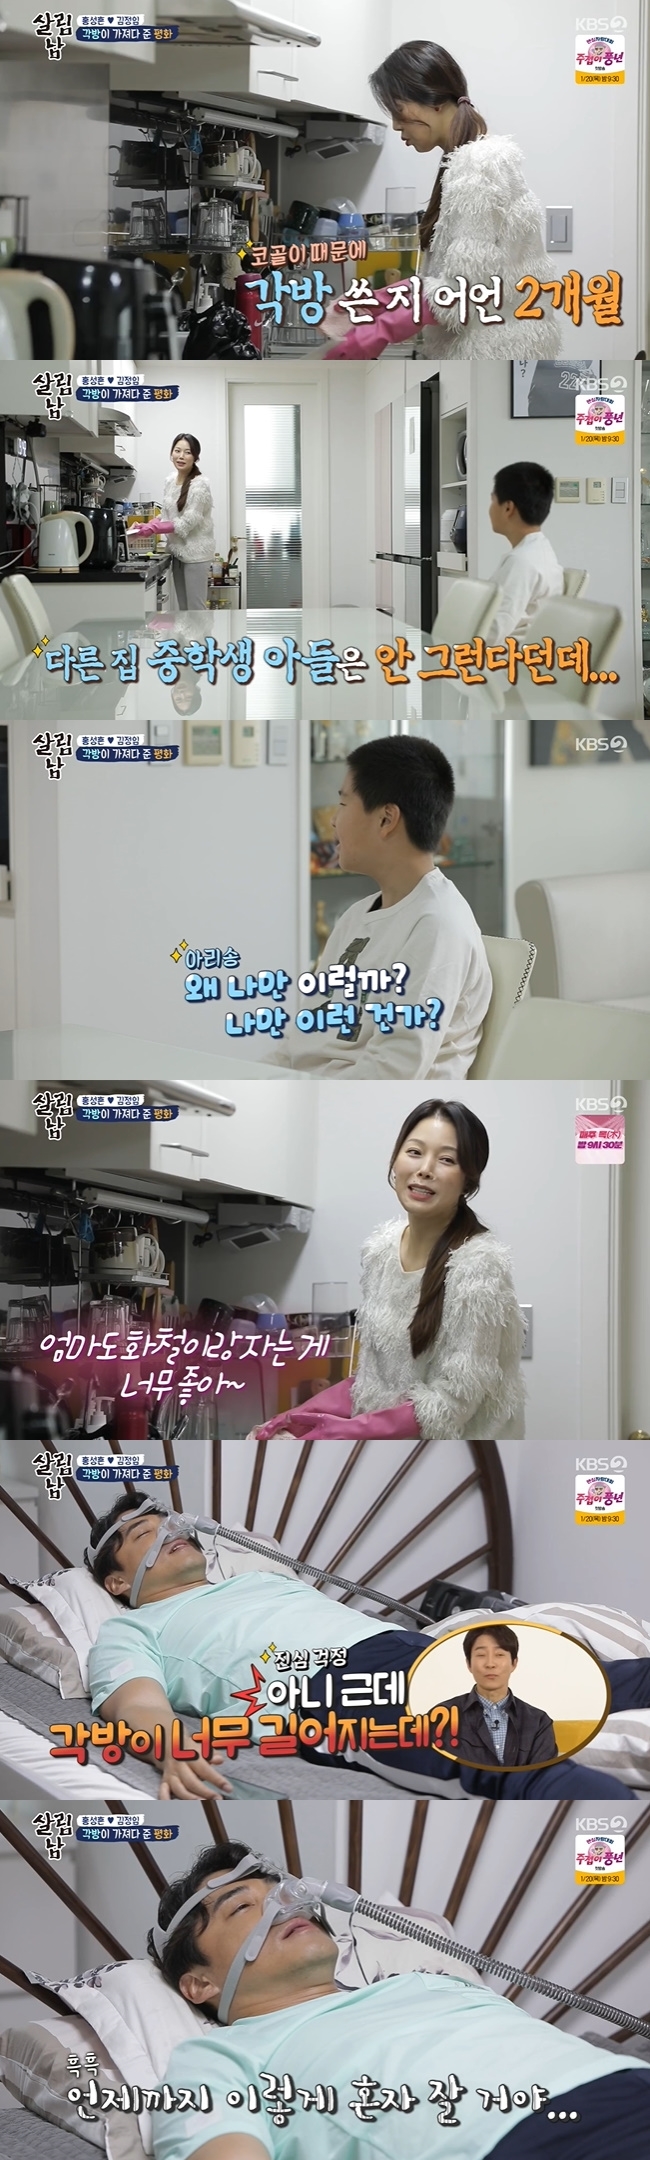 Hong Sung-heon, Kim Jung Im couple have been spending two months on snoring issues.On KBS 2TVs Season 2 of Living Men, which aired on January 15, the daily life of the Hong Sung-heon family was revealed.When Hong Sung-heons son Hong Hwa-cheol, who was lying on the living room sofa and relaxed, asked, Father still sleeps, Kim Jung Im said, If you are with your mother, you will wake up together.But I feel uncomfortable because I sleep alone. The Hong Sung-heon, Kim Jung Im couple have been in each room for two months because of snoring.Hong Sung-heon sleeps in the room of Honghwa iron, but Honghwa iron sleeps with his mother in the room.But I sleep well because I sleep with my mother.Kim Jung Im said, My mother and her friends are wondering that my middle school son is not going to sleep well with my mother. But I am good.Why am I the only one? Am I the only one? Im a tough guy at school. Not at home, he quipped.Kim Jung Im said, To be honest, sleeping with the iron is better for me, not telling Father. But he said, What is it, Mom?Youre comfortable sleeping with me? Okay, Mom.